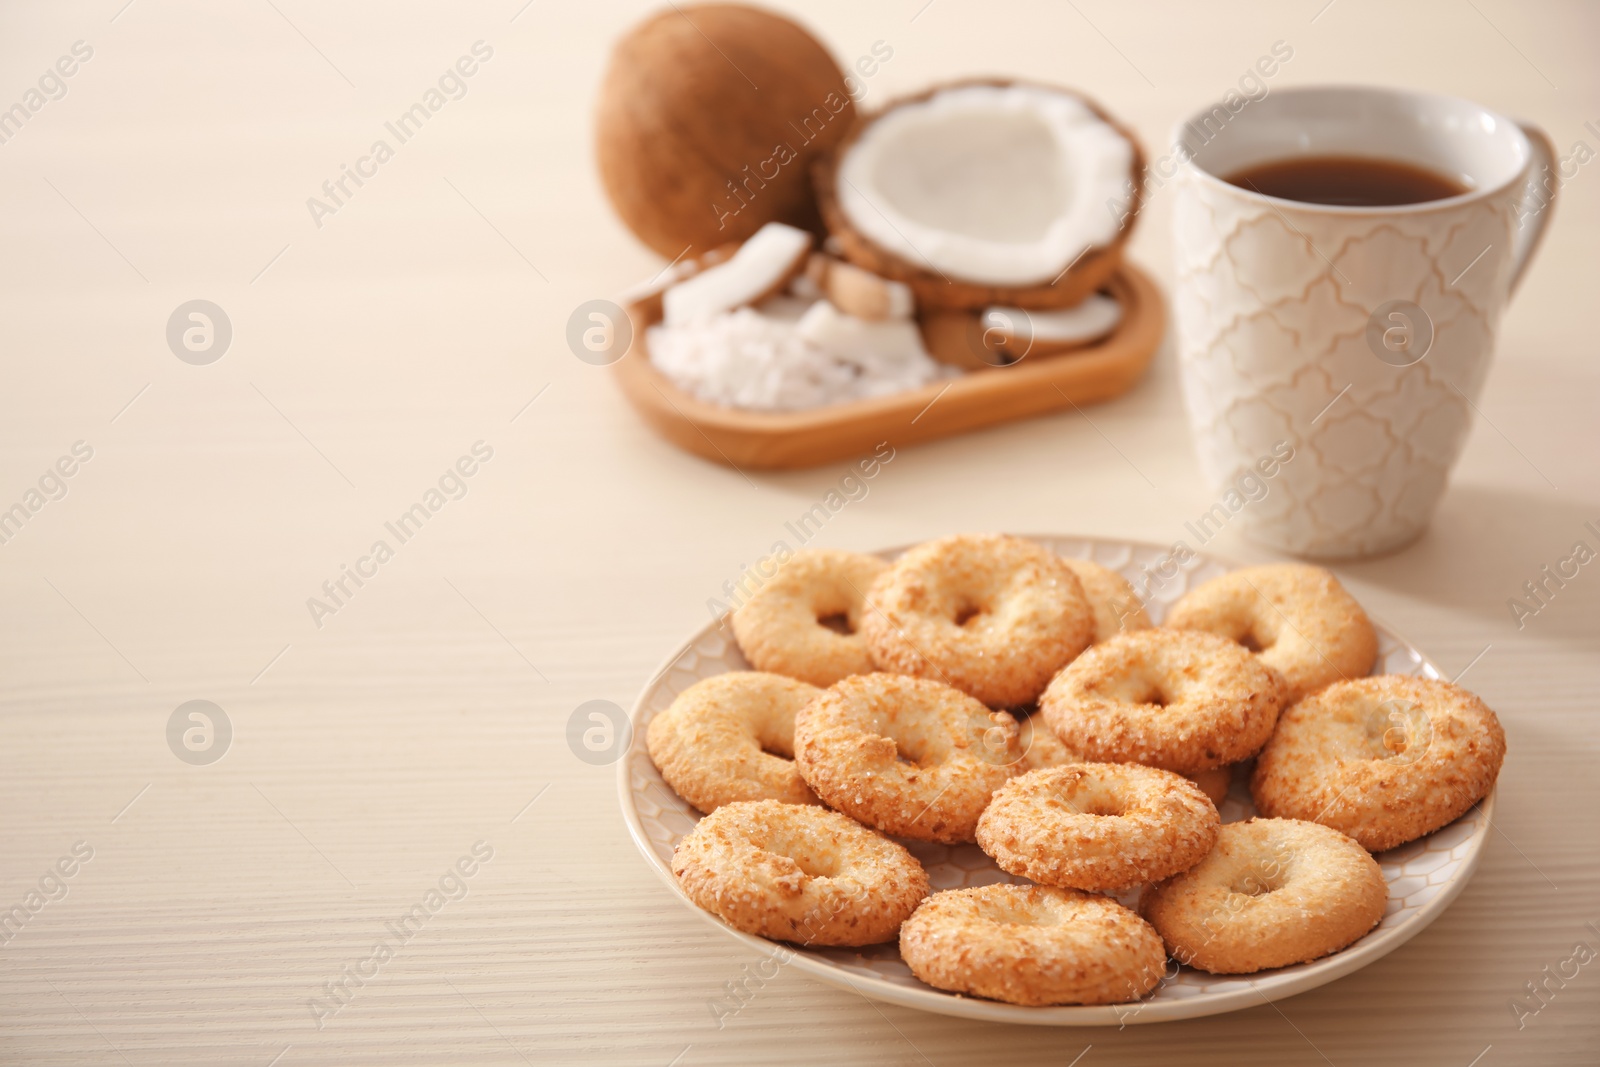 Photo of Plate with cookies and cup of tea on wooden background